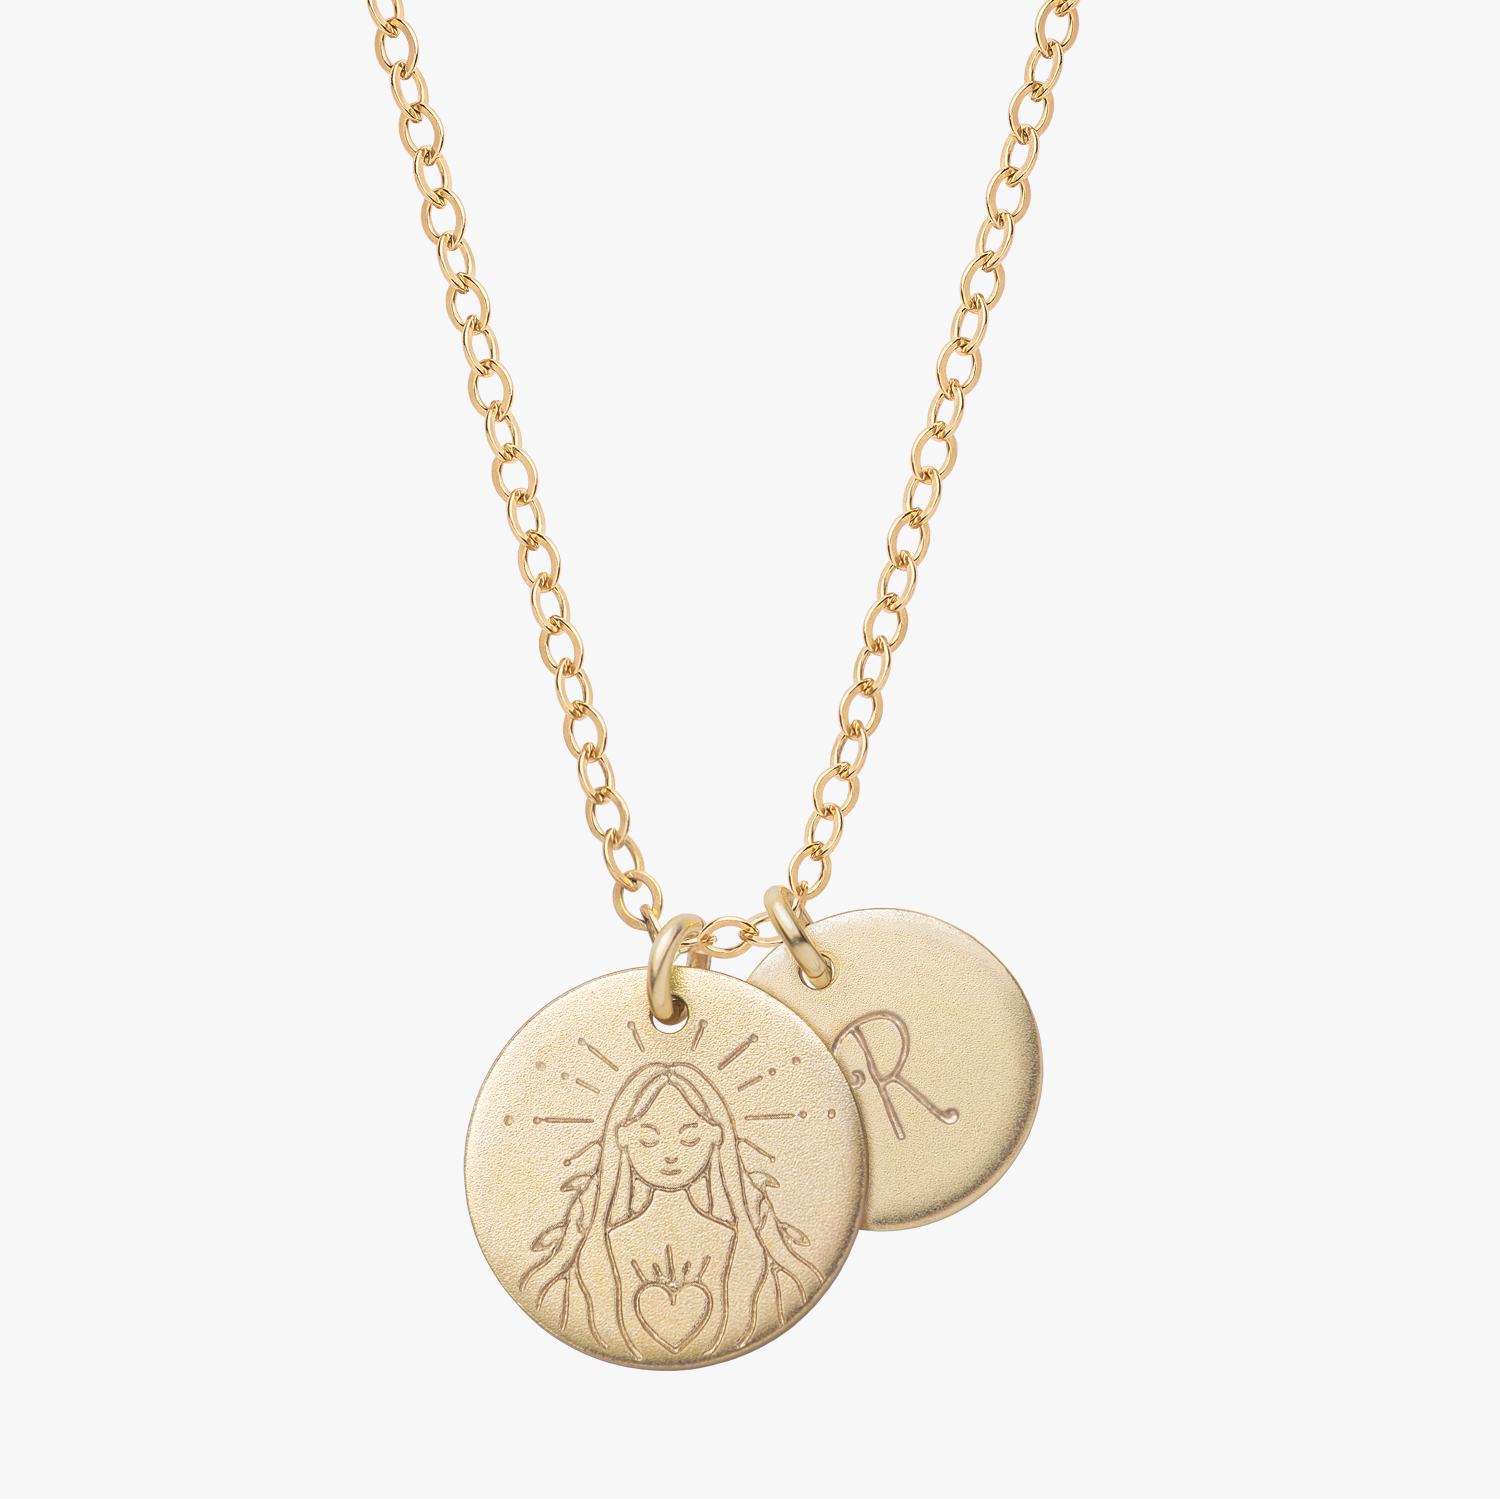 Personalized Empowerment Gold Necklace